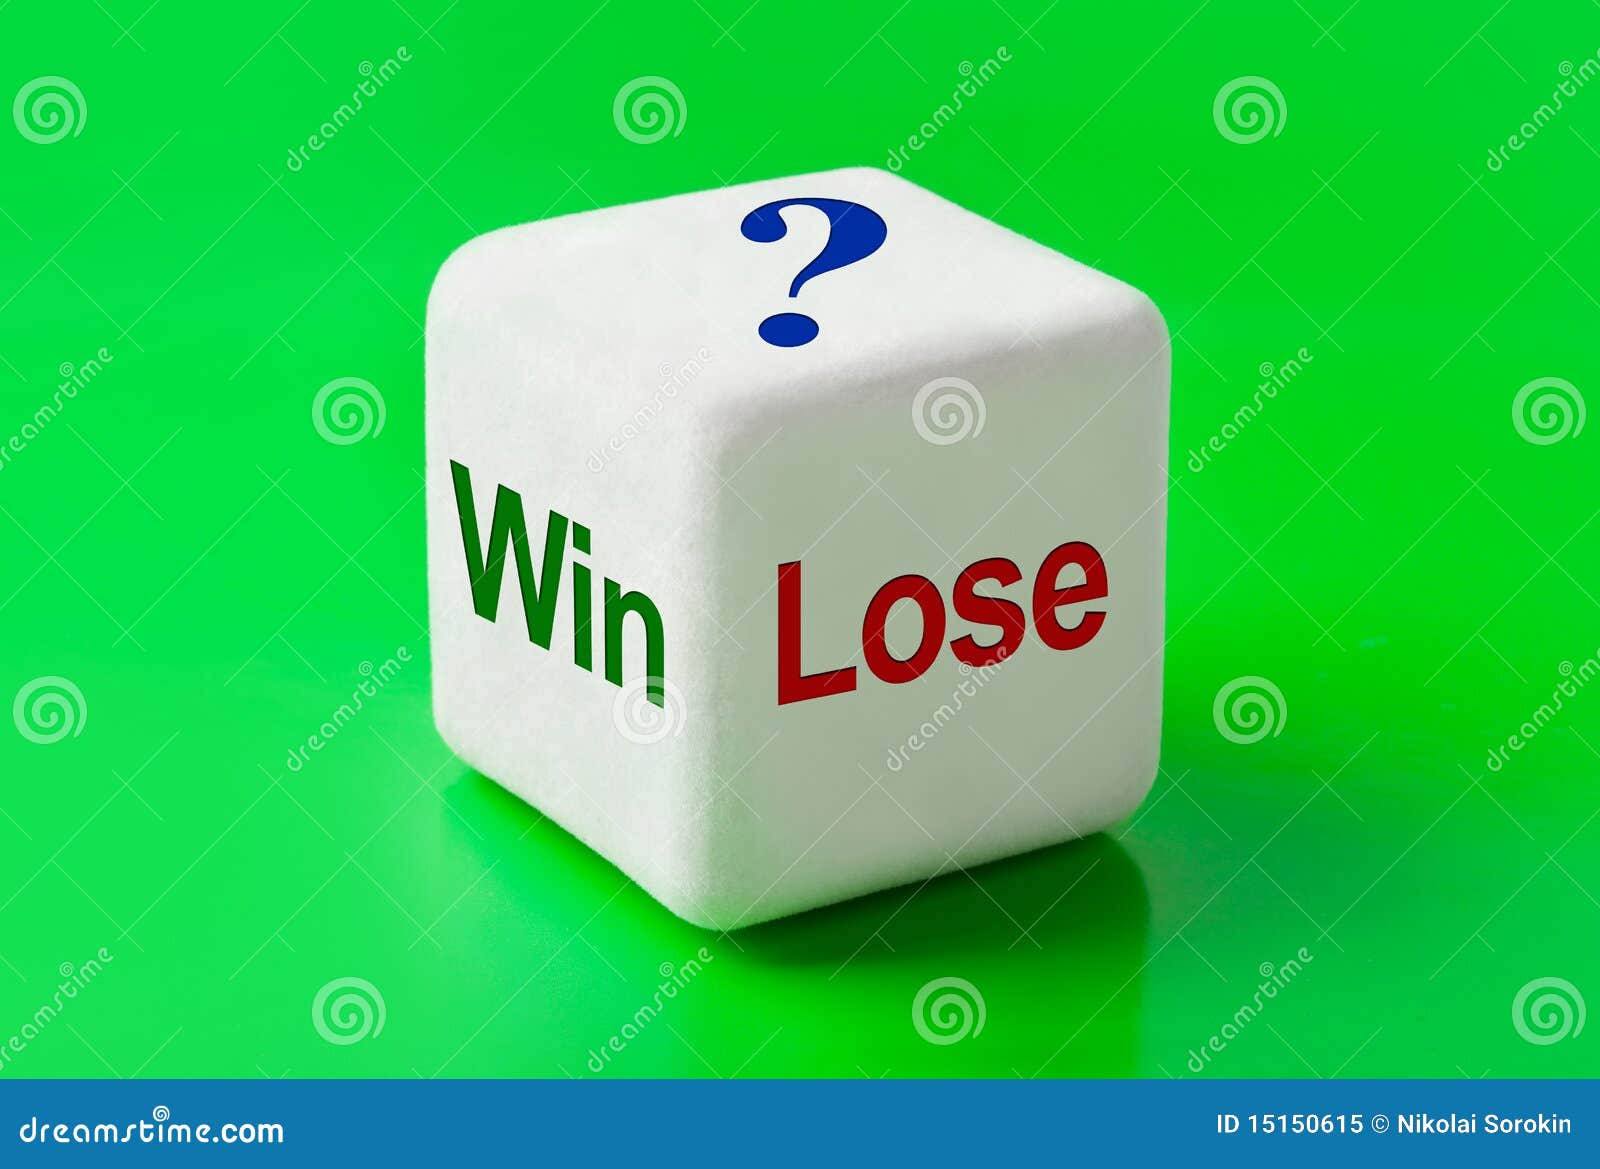 dice with words win and lose